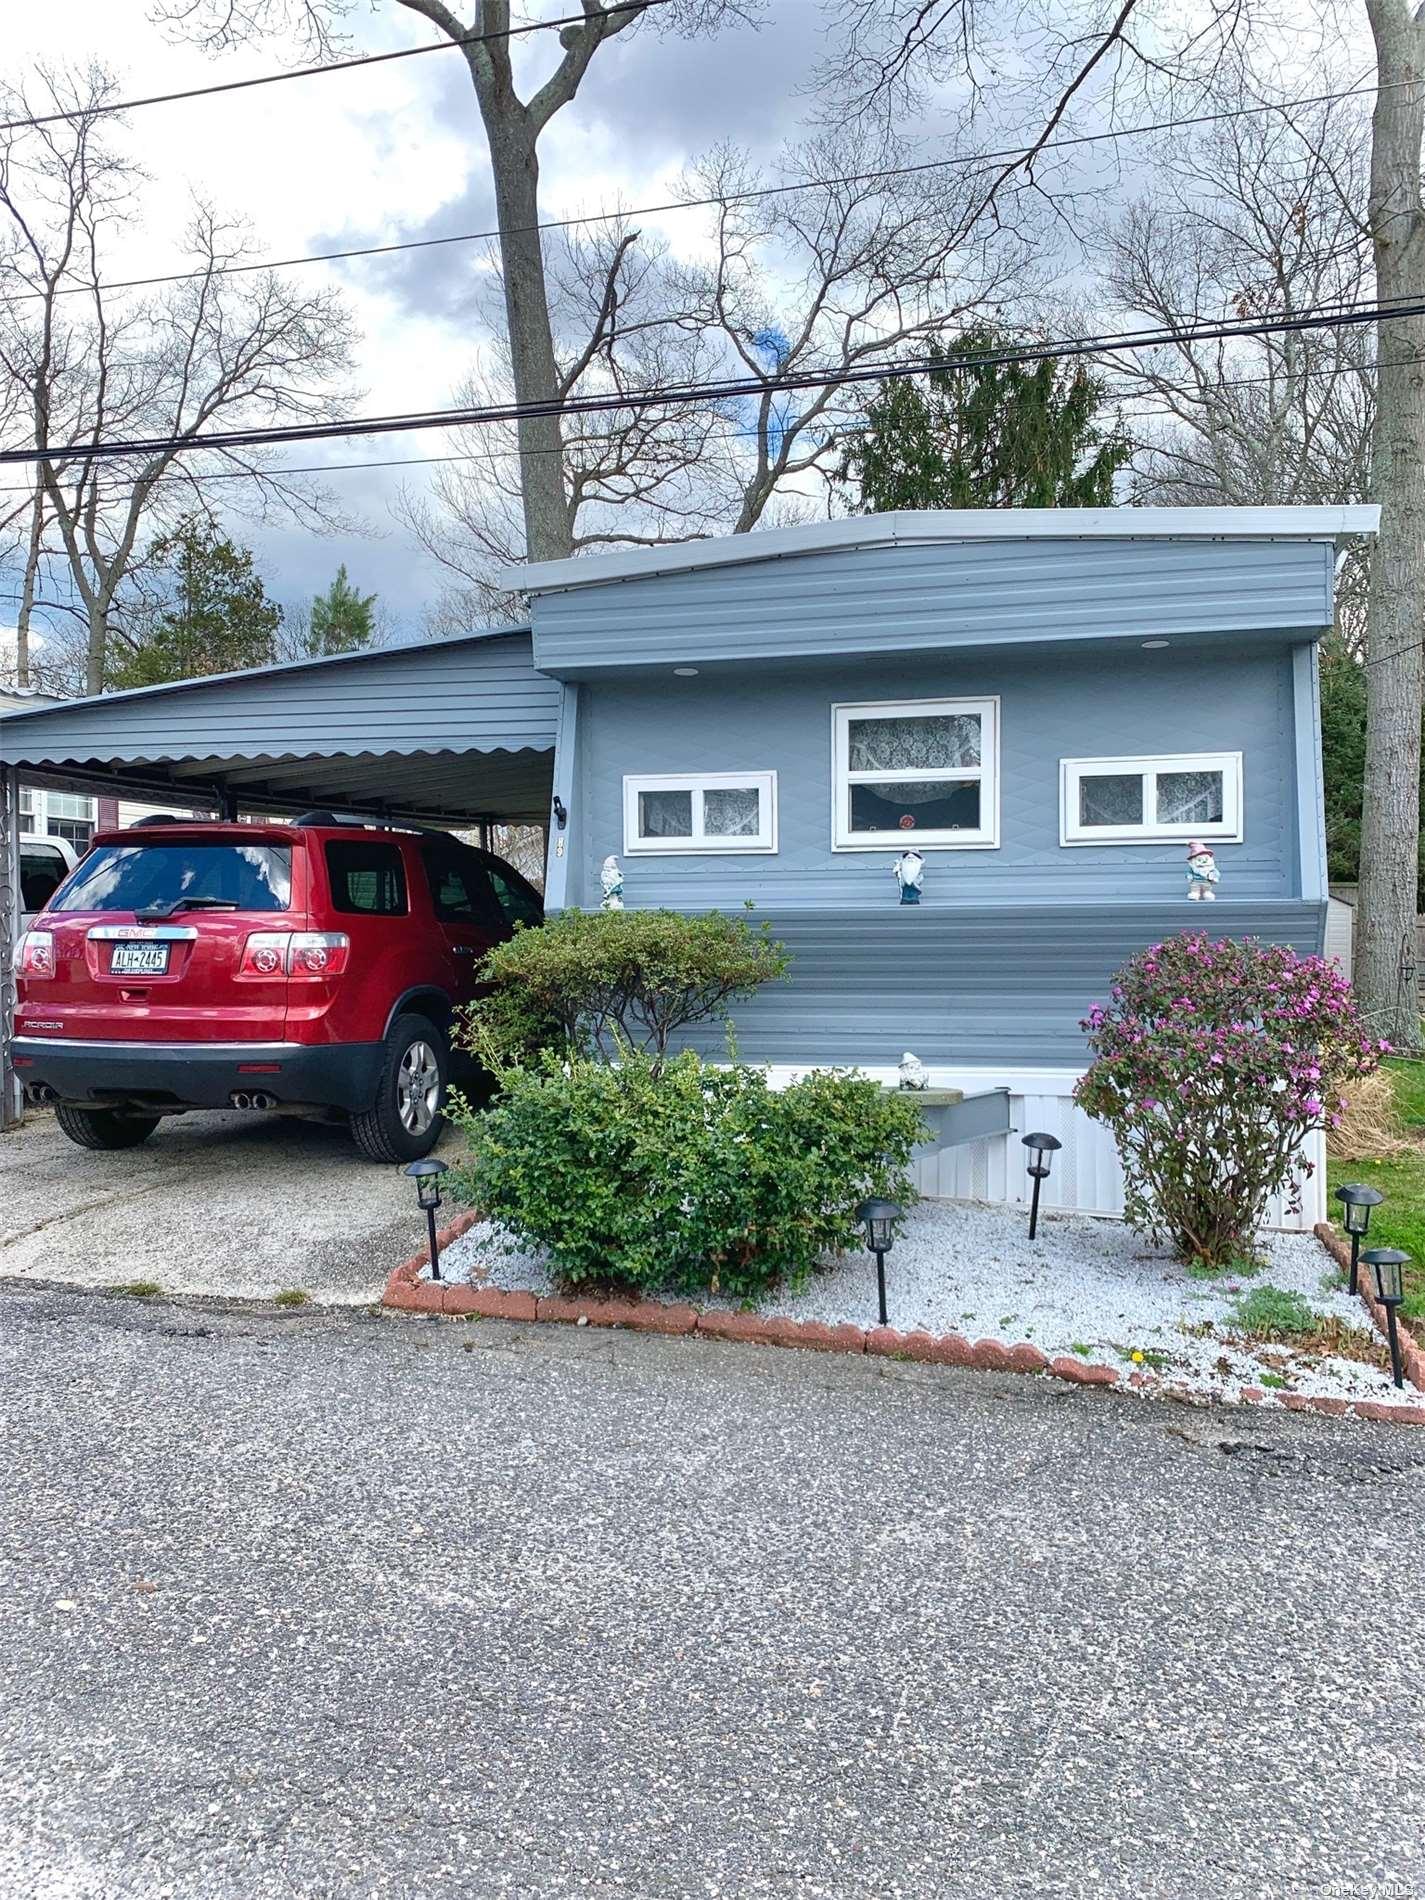 658 Sound Avenue #H9 in Long Island, Wading River, NY 11792